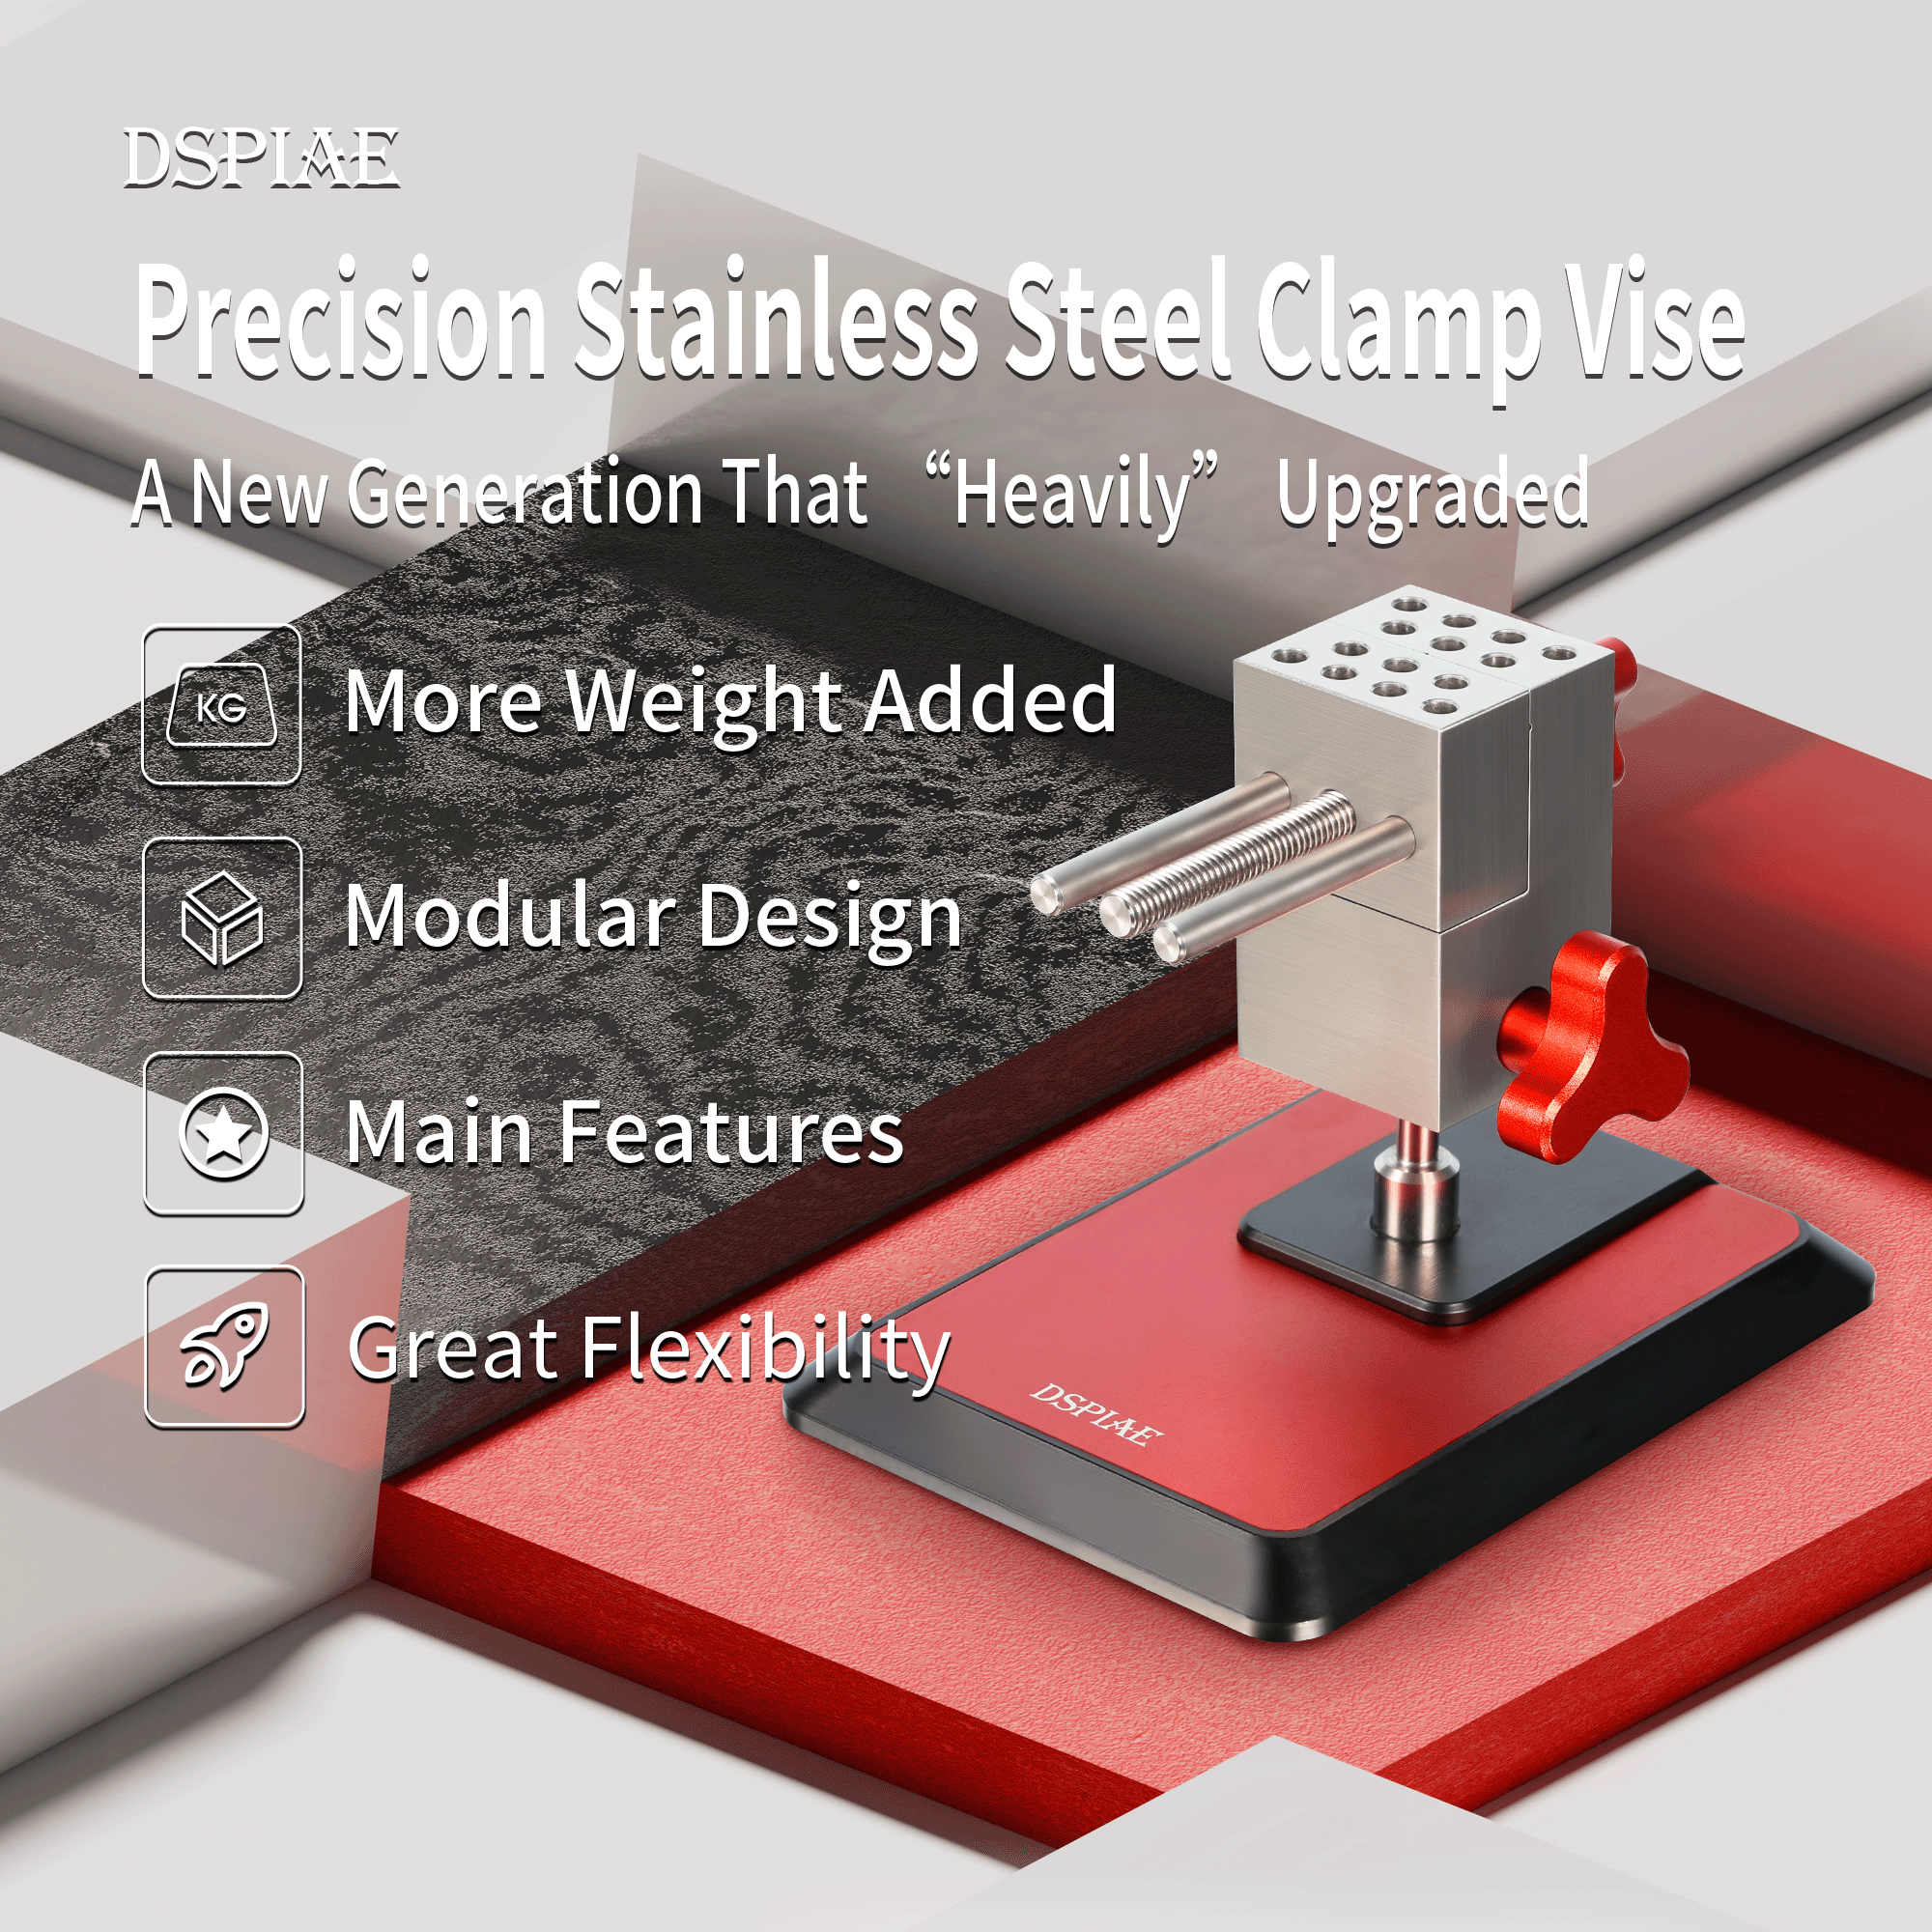 DSPIAE - AT-TV Precision Stainless Steel Clamp Vise